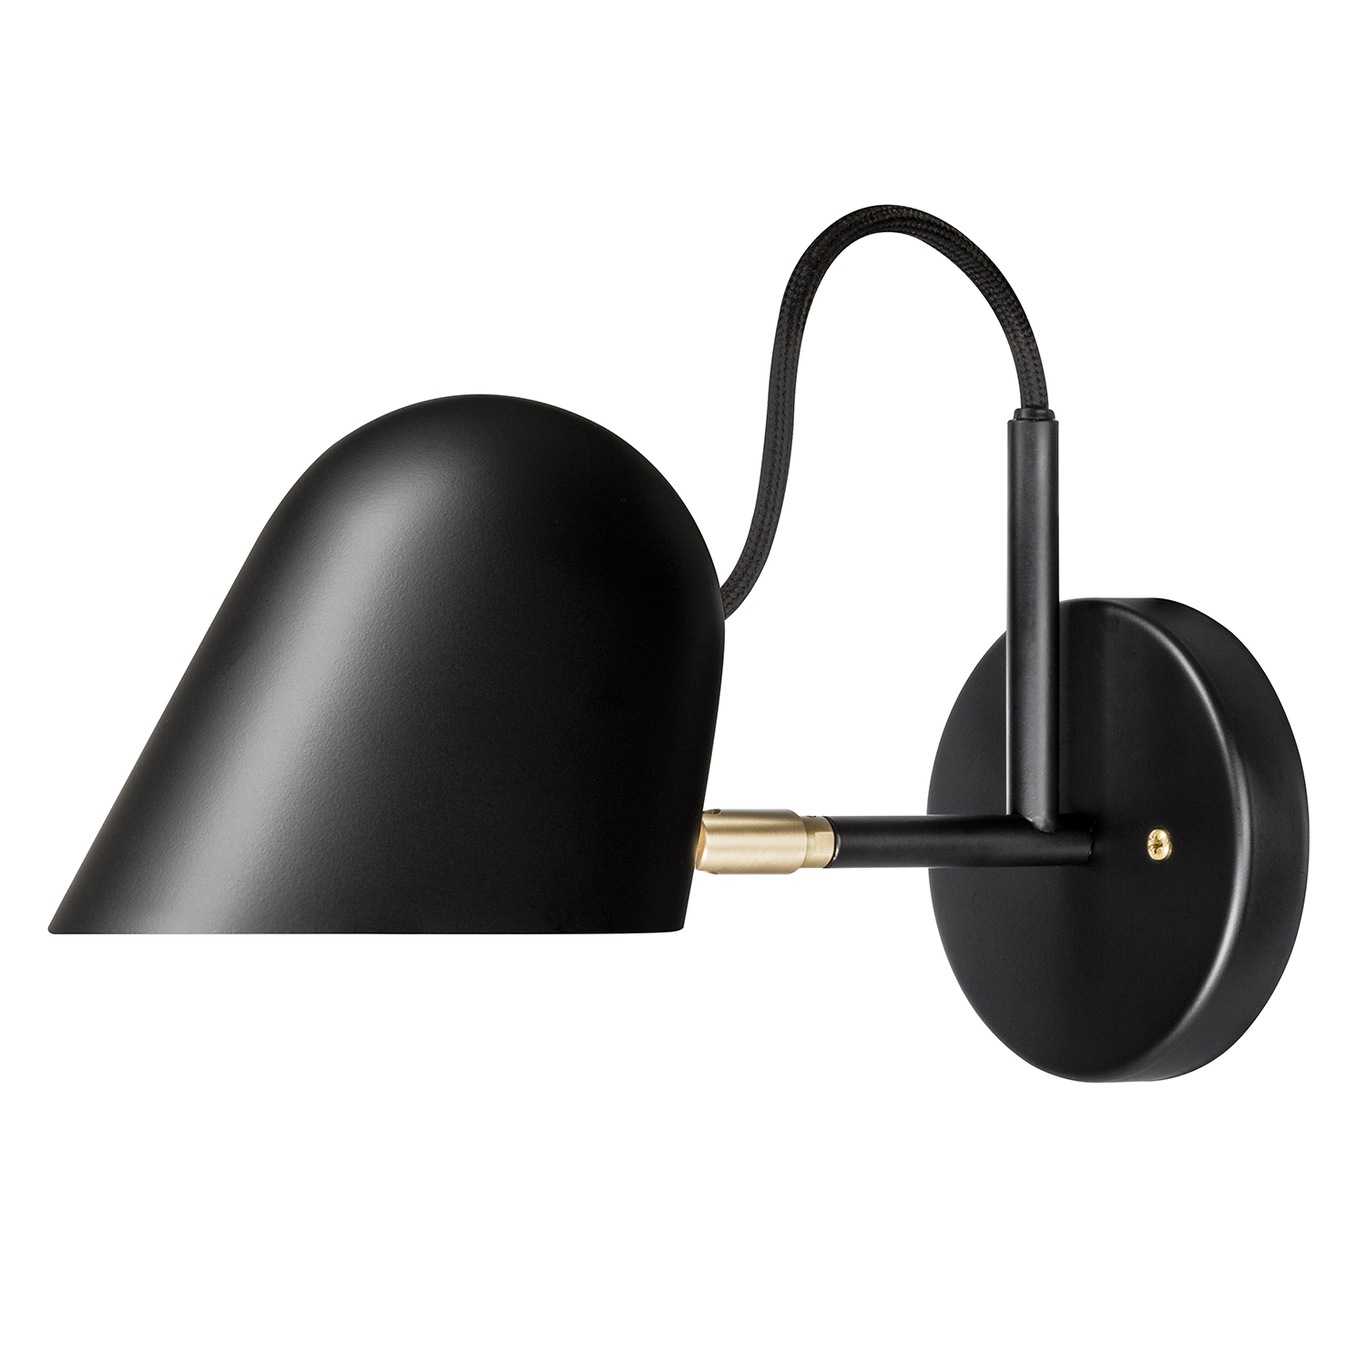 Streck Wall Lamp Fixed Mount, Black/Brass